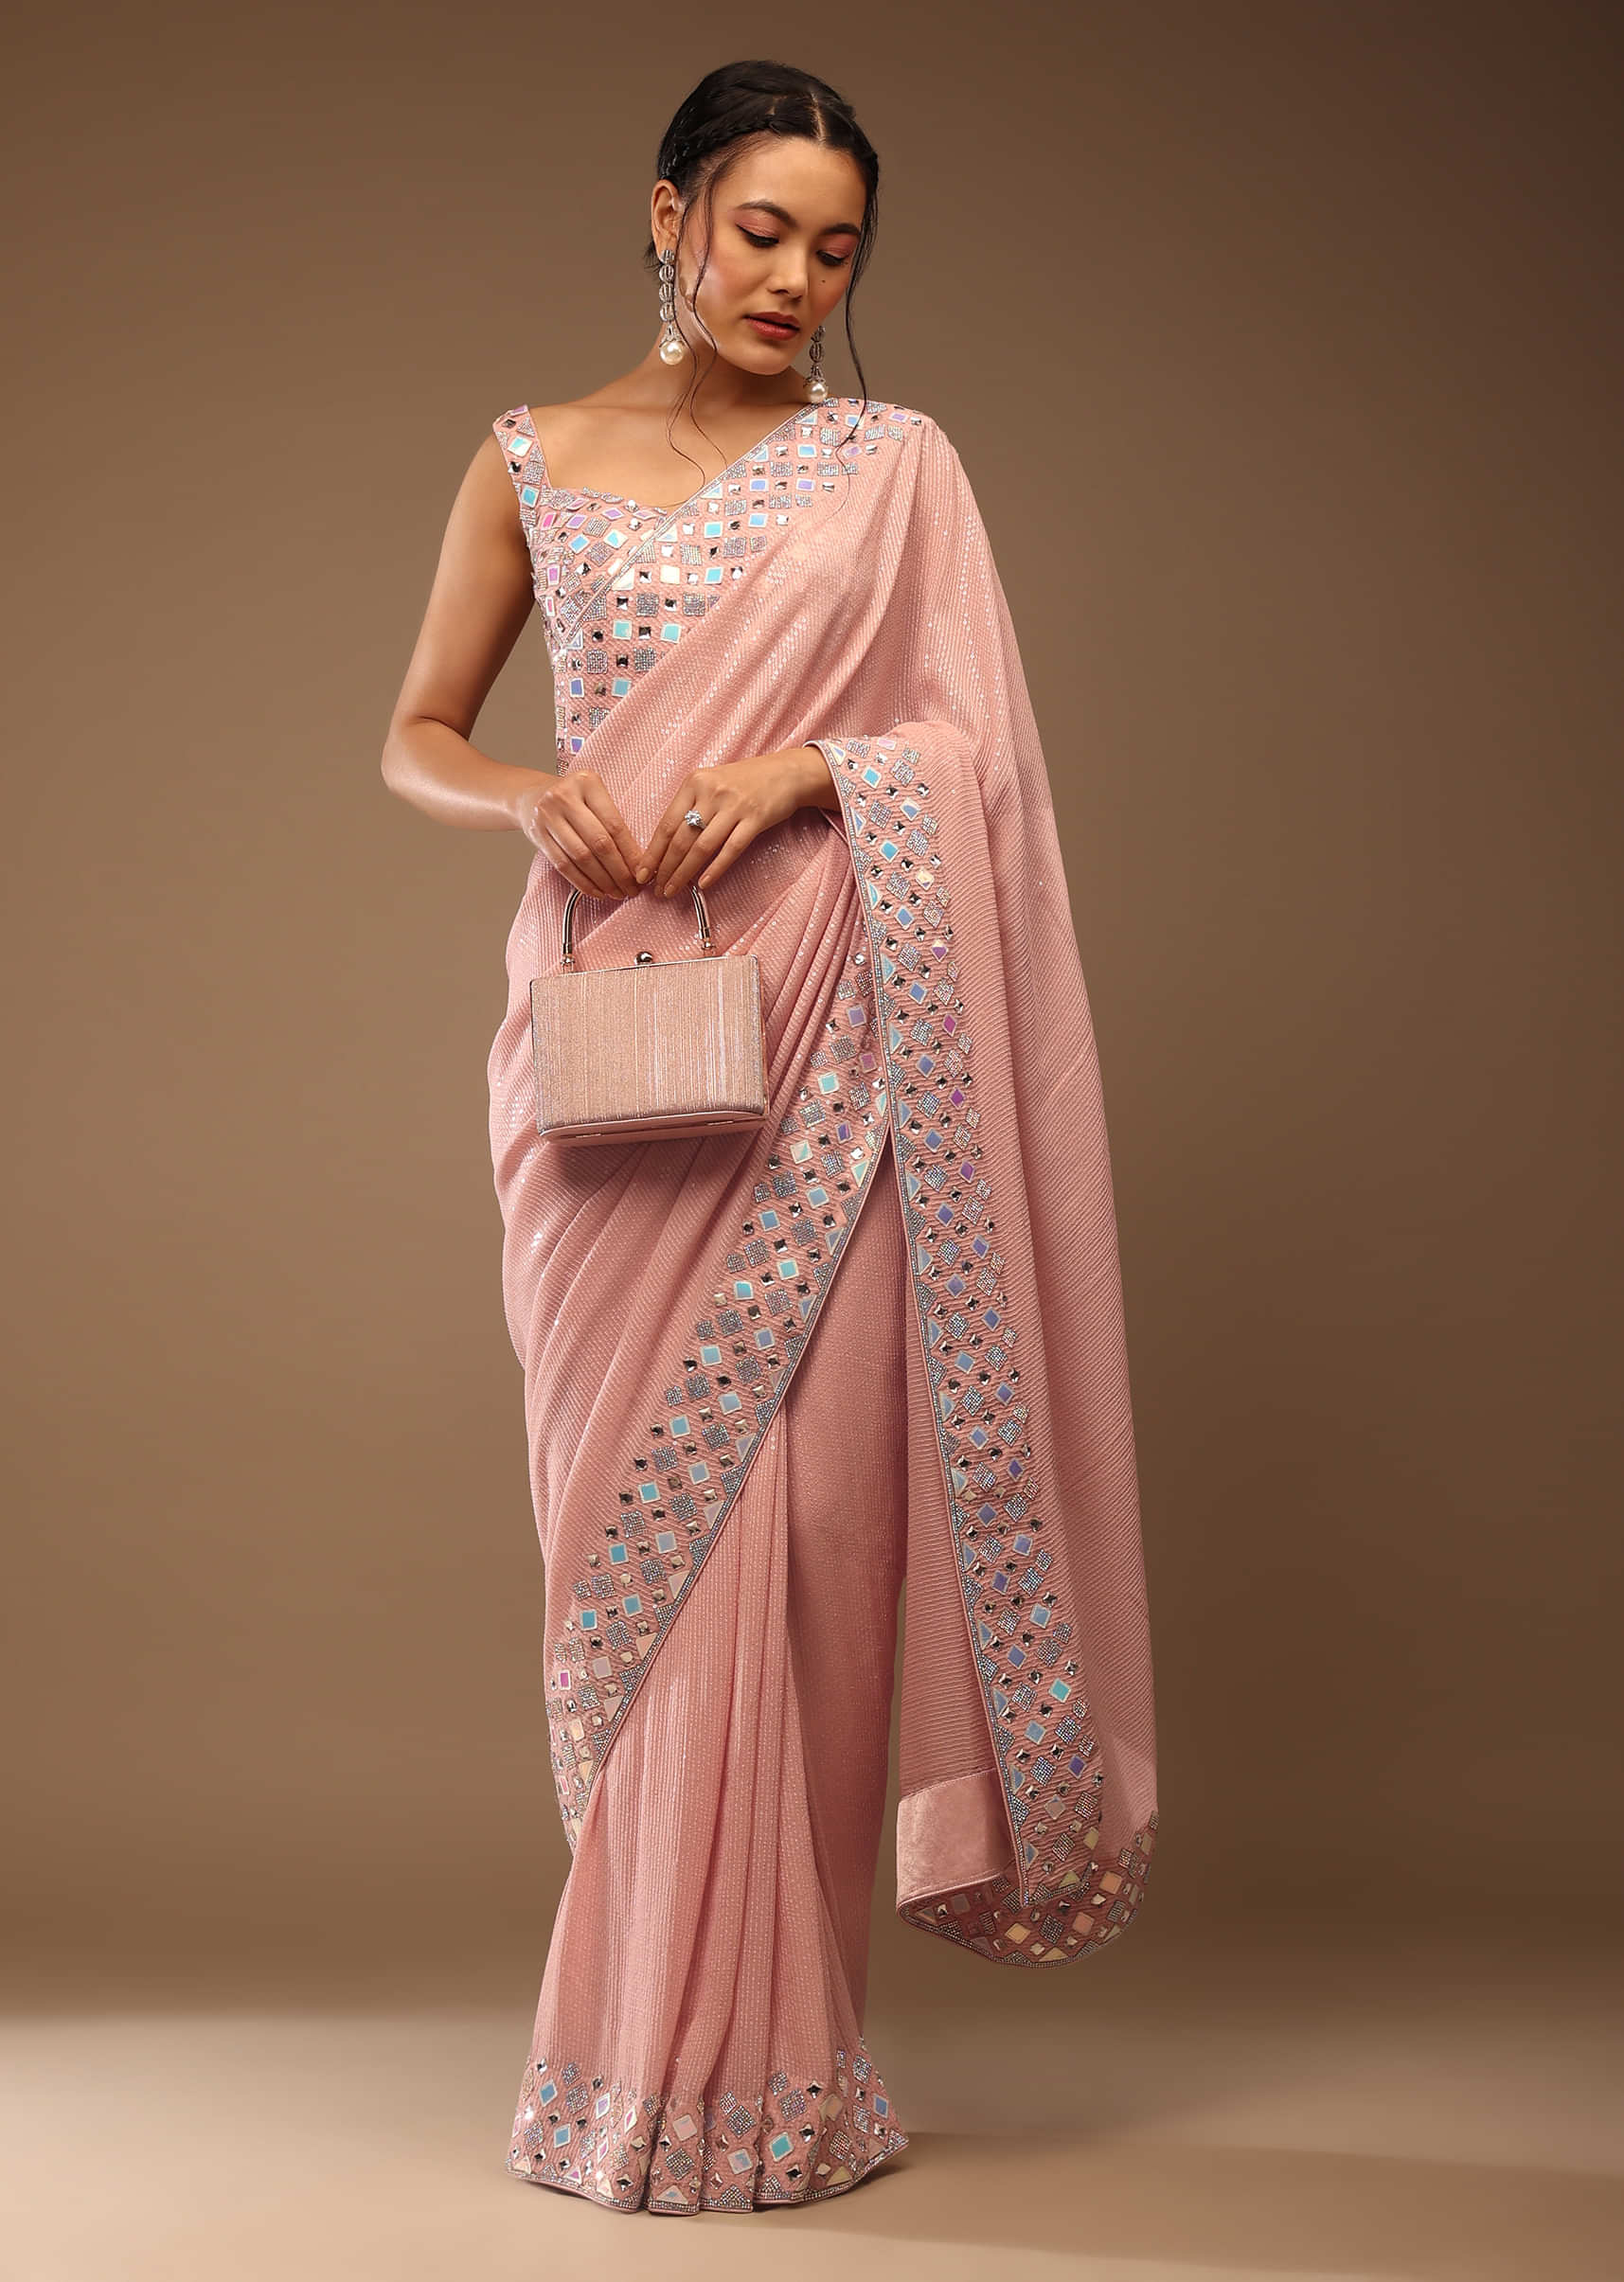 Peach Skin Saree With A Crop Top In Iridescent Foil Embellishment